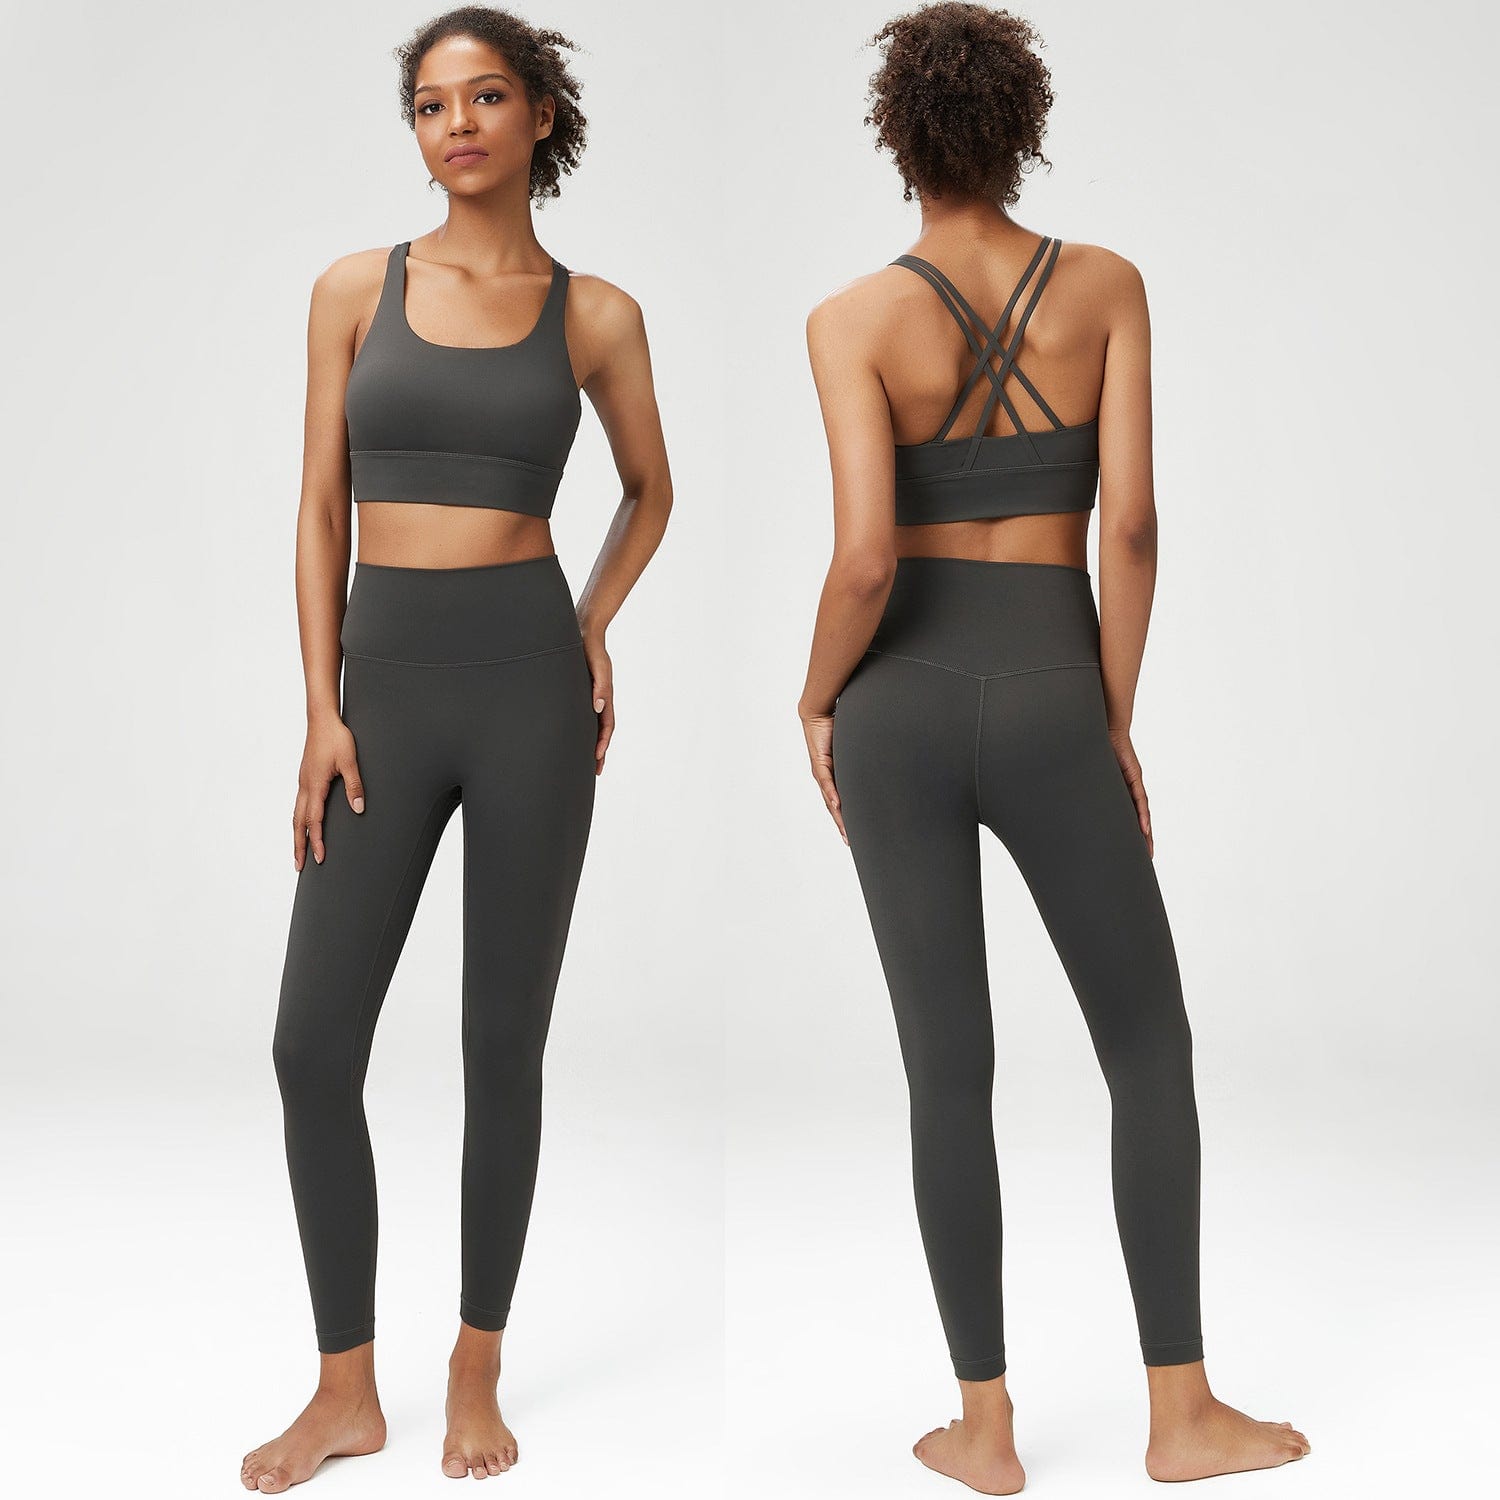 Compression Workout Sets for Women